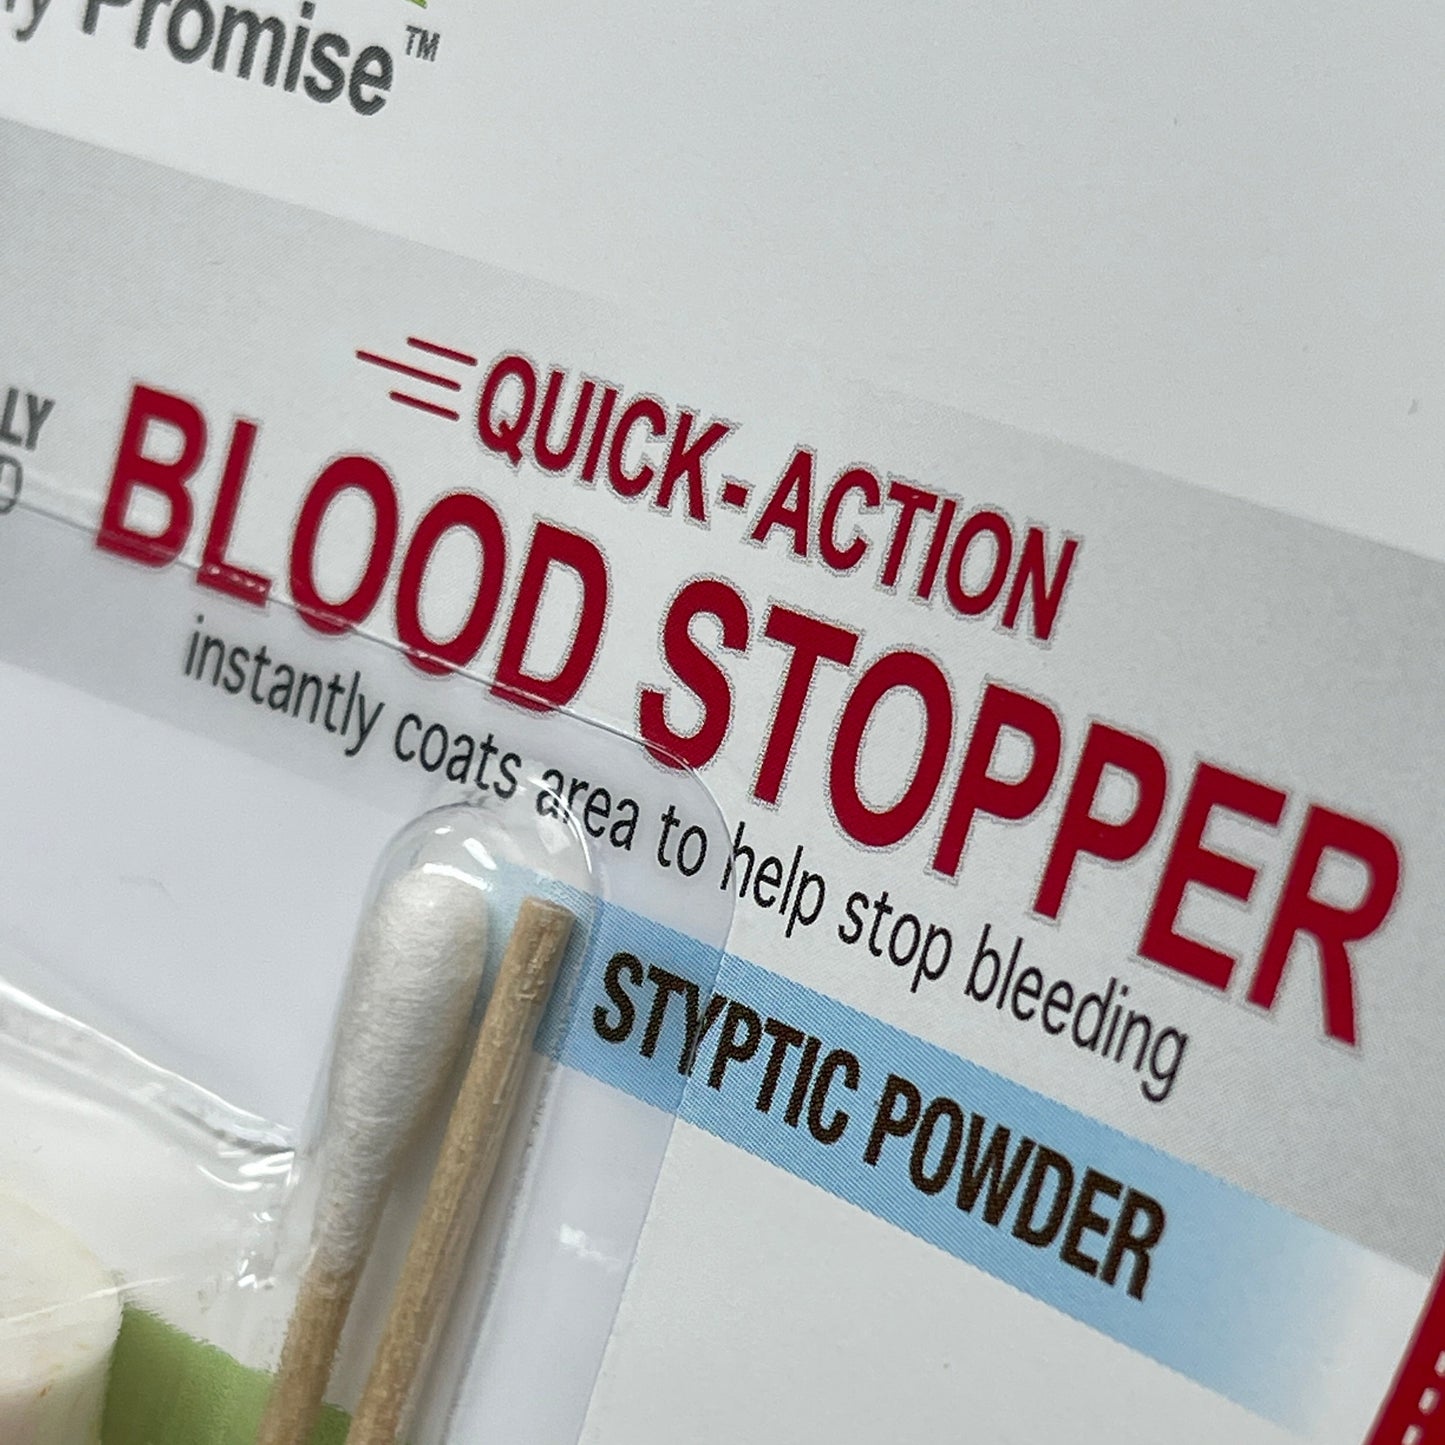 FOUR PAWS Pack of 6 Quick Action Blood Stopper Styptic Powder Bottles 0.5oz (New)